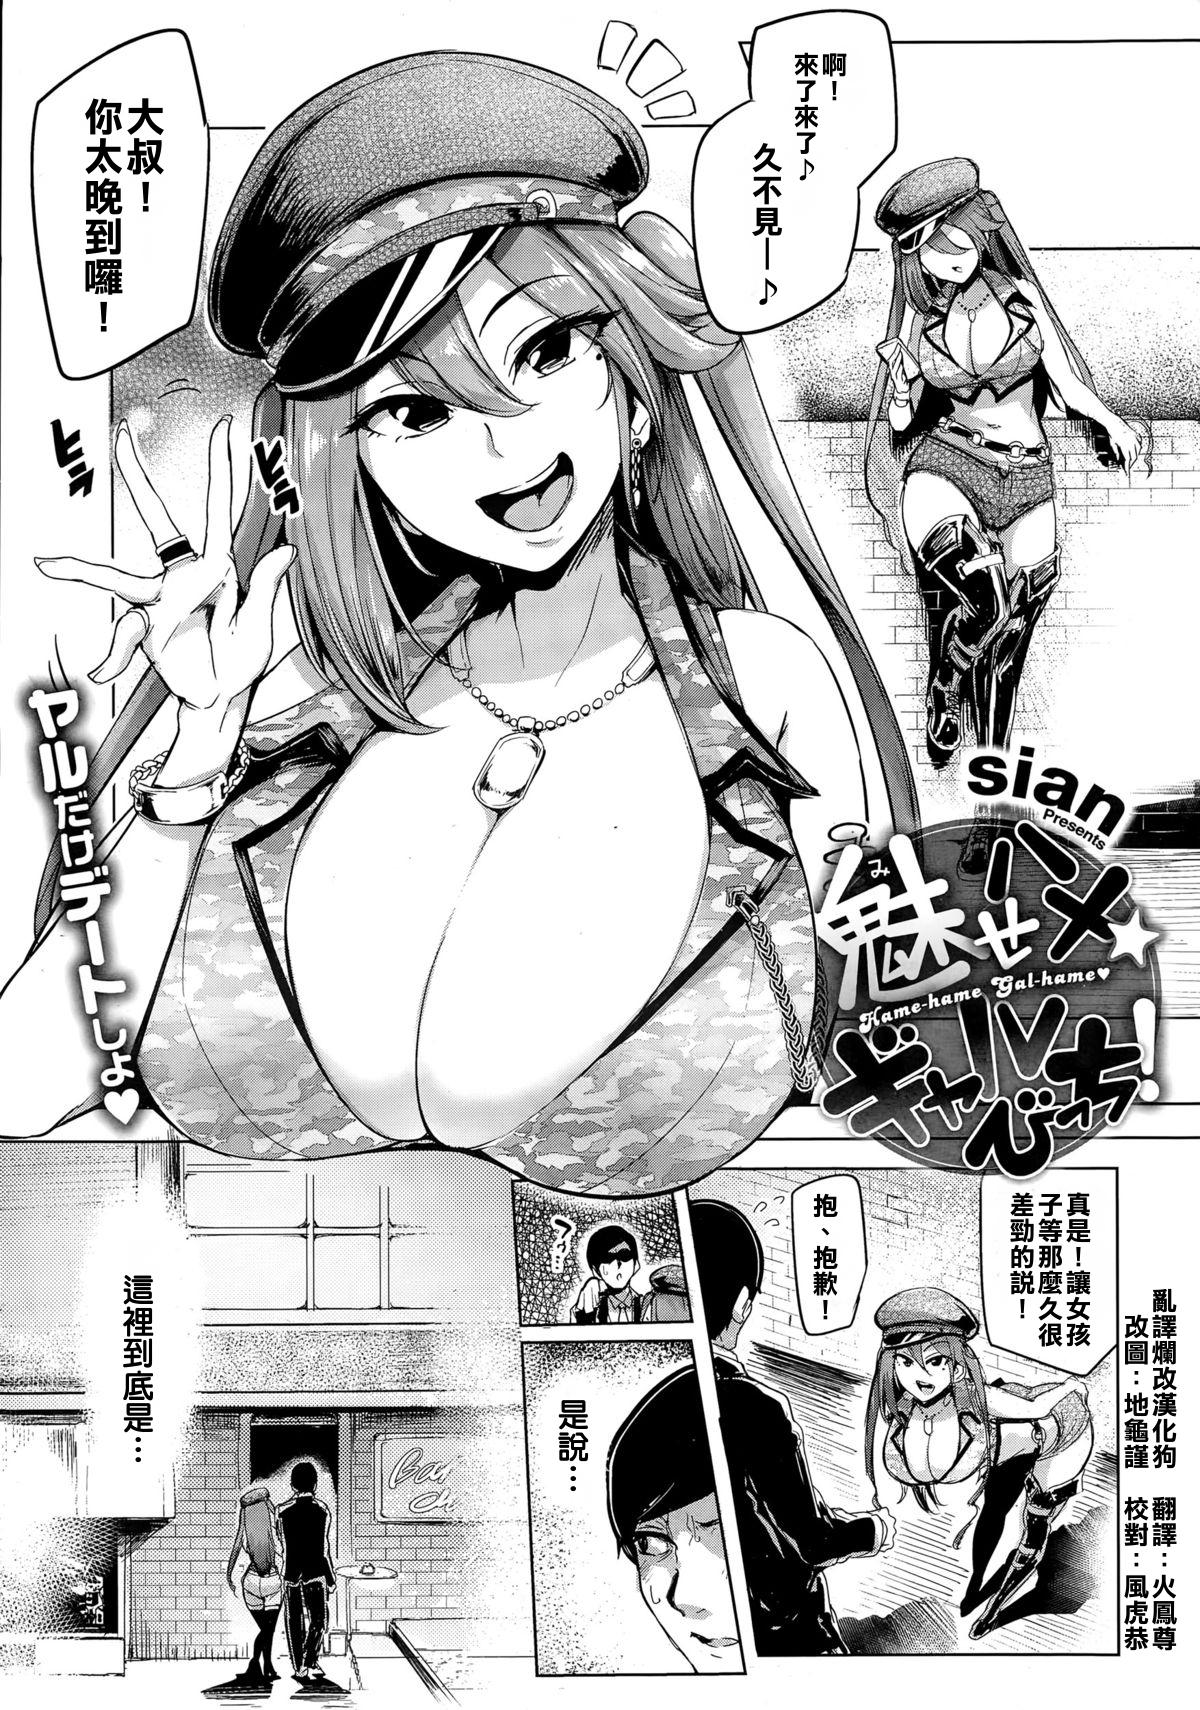 Joven Soku Hame Gal Bitch ! ＋ Mise Hame Gal Bitch ! | One-Night Stand with a Gyaru Slut! + Fucking a Gyaru Slut! + Gals Bitch After Oshiri Hen | Gyaru Slut! After Butt Edition Real - Page 5